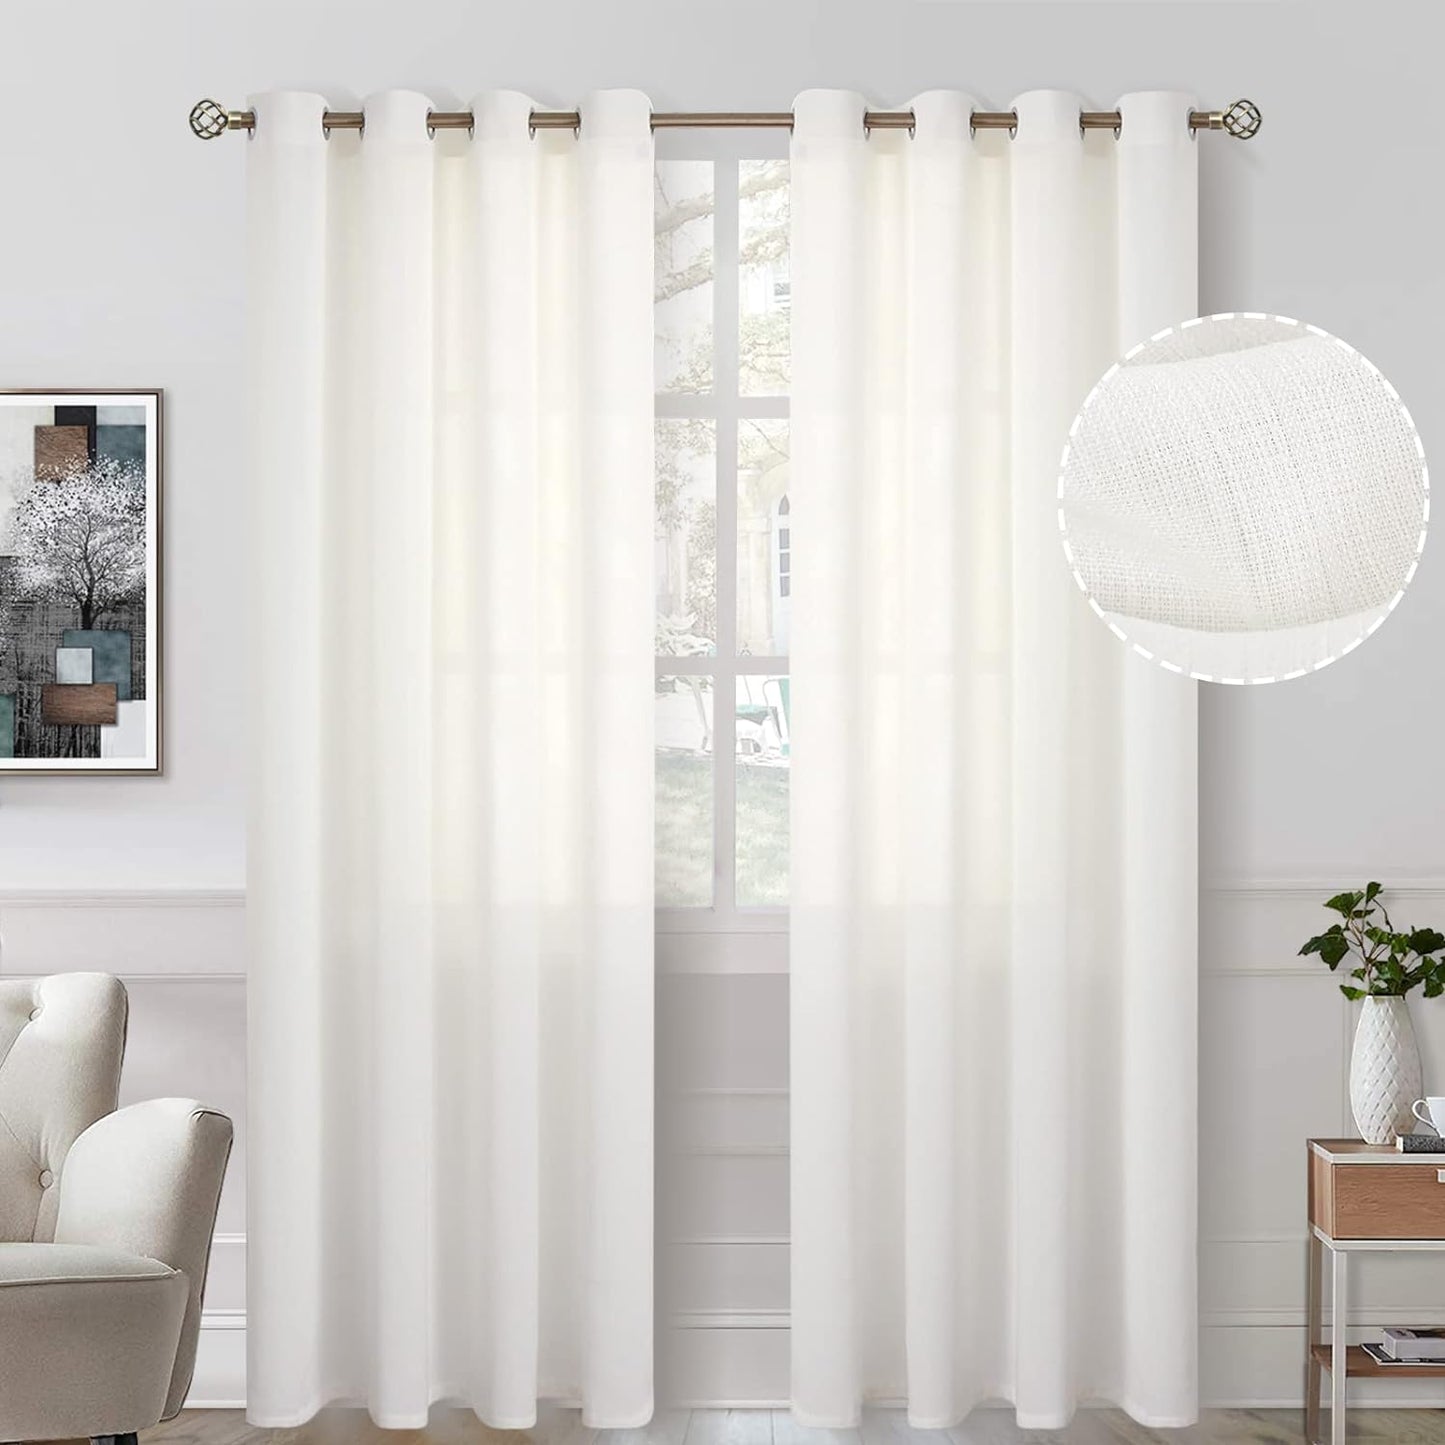 Bgment Natural Linen Look Semi Sheer Curtains for Bedroom, 52 X 54 Inch White Grommet Light Filtering Casual Textured Privacy Curtains for Bay Window, 2 Panels  BGment Ivory Cream 52W X 95L 